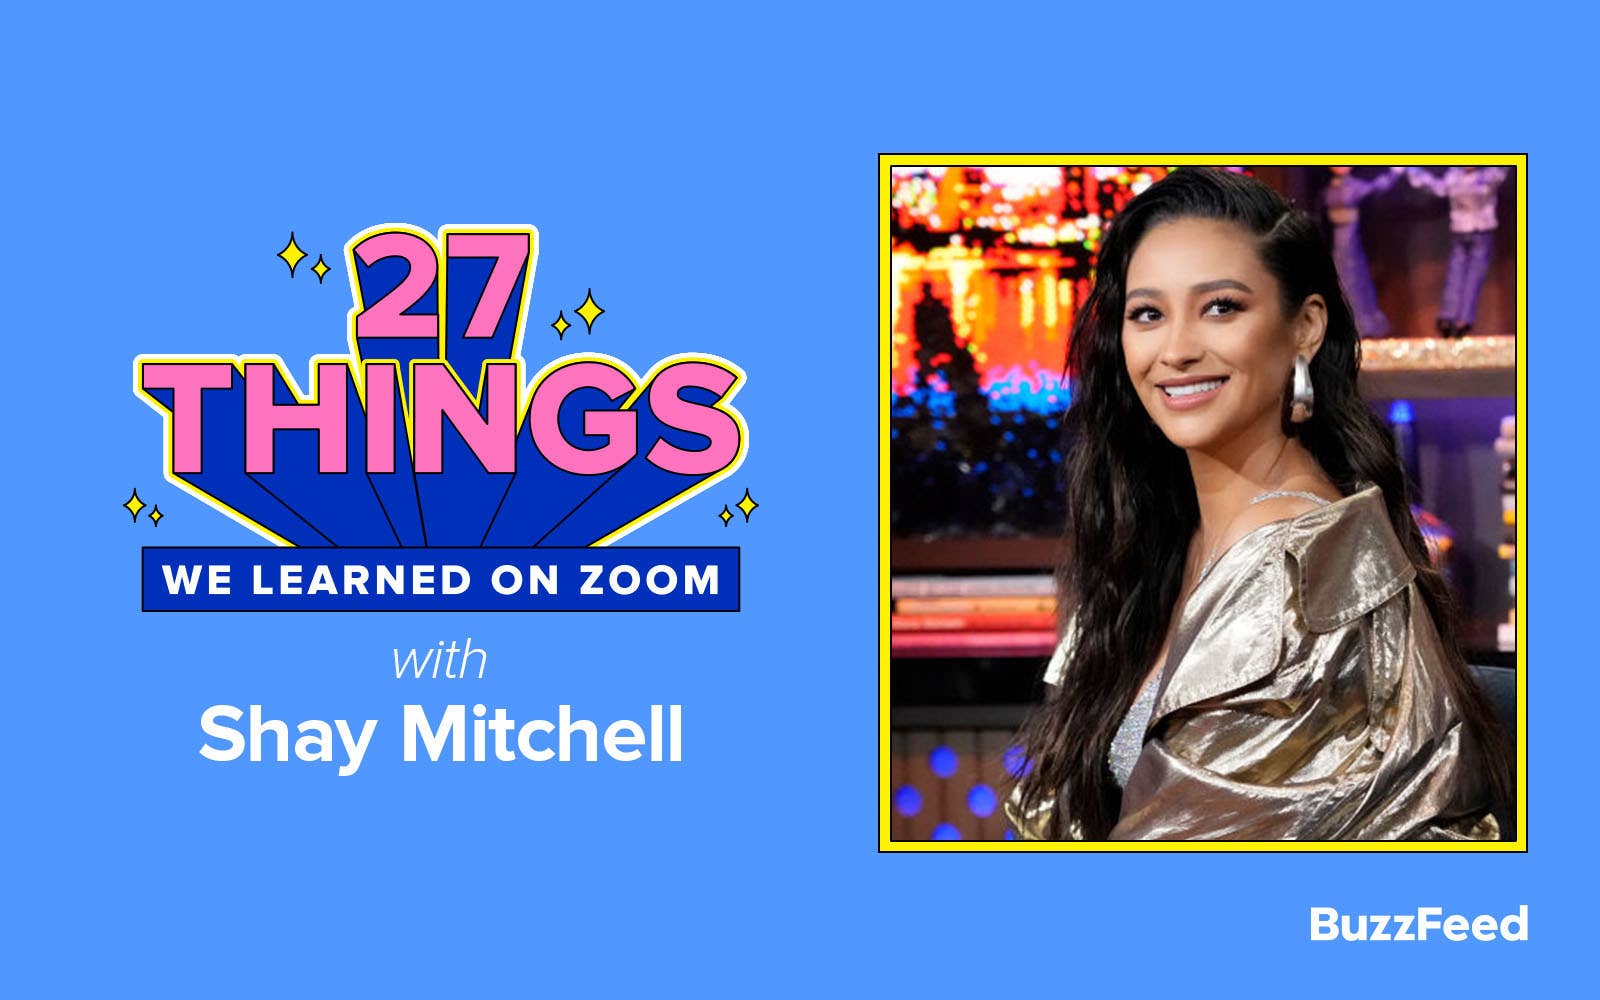 27 things we learned on Zoom with Shay Mitchell